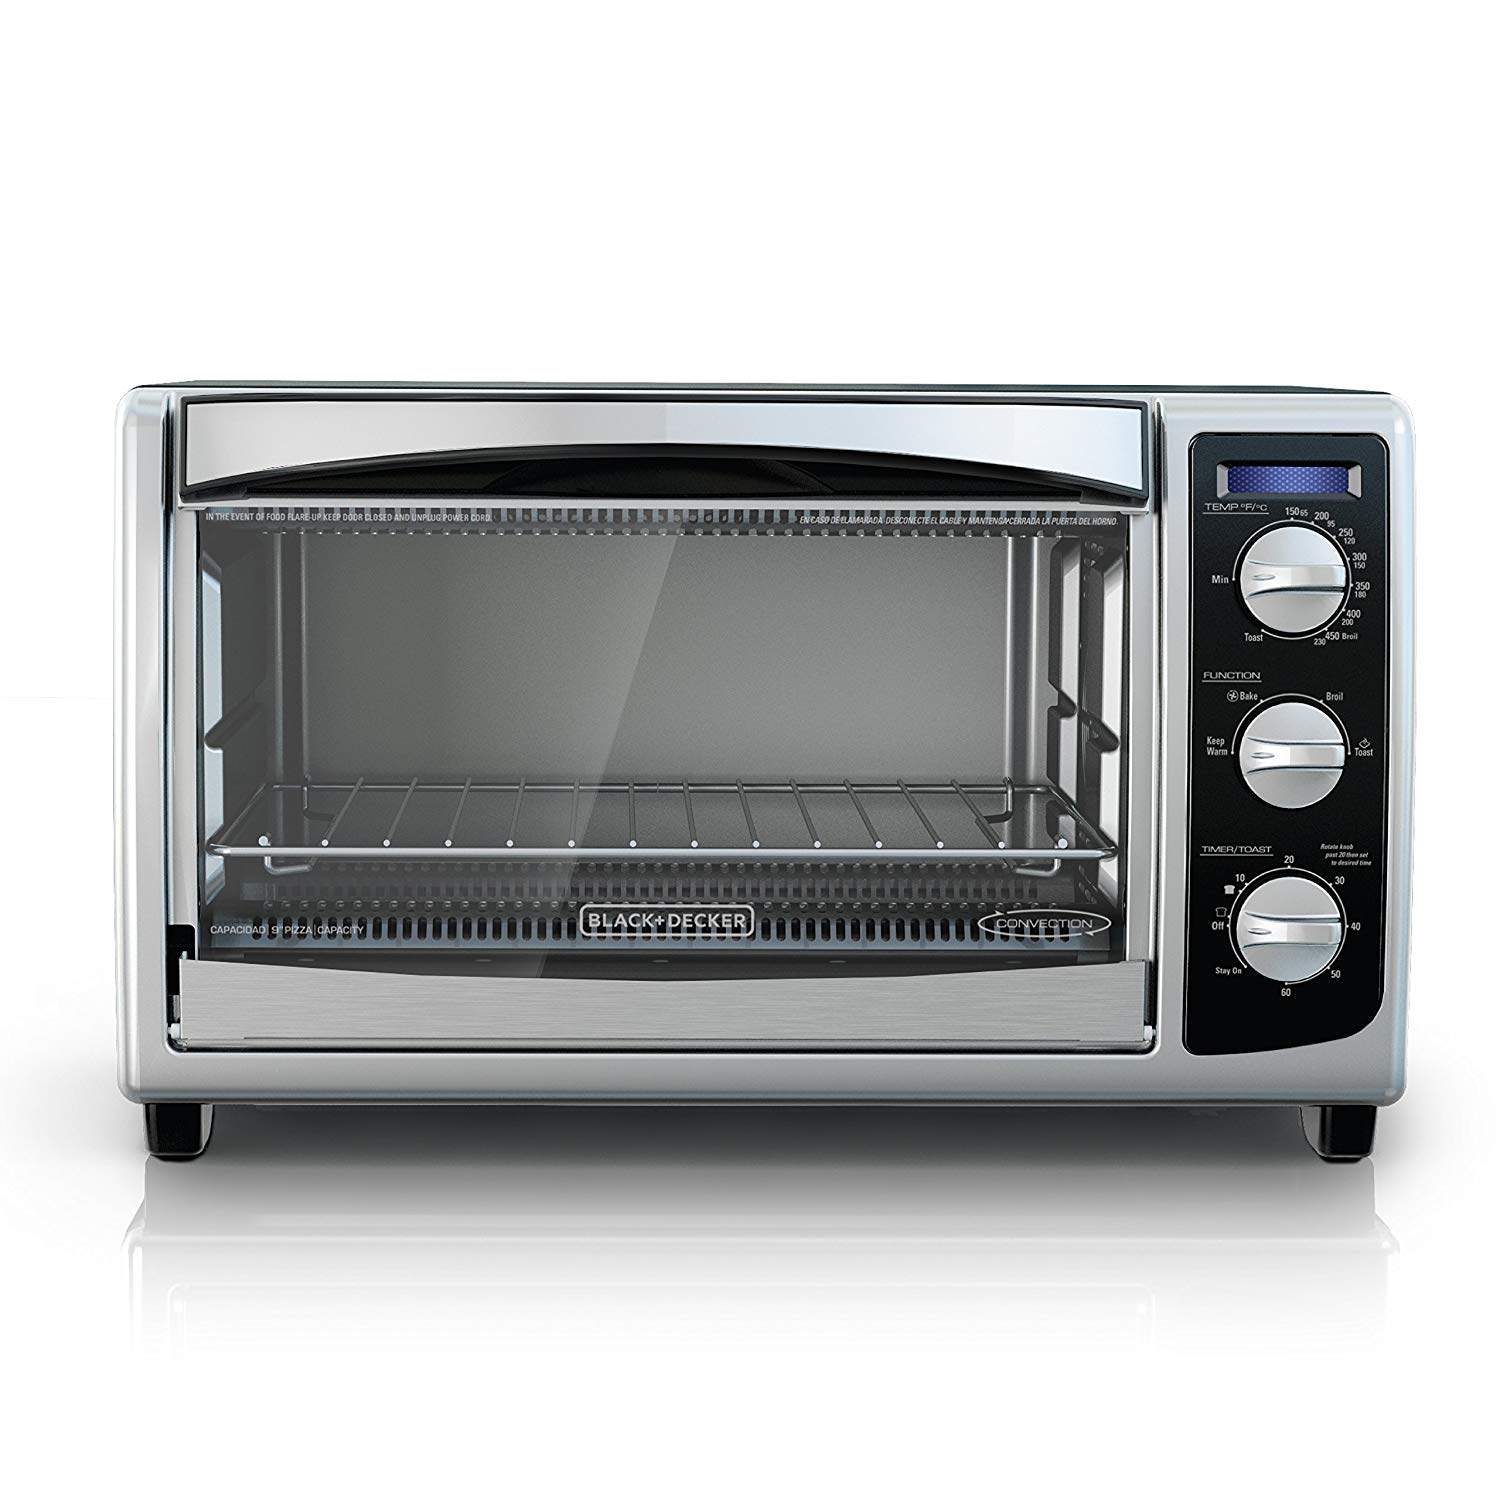 An image of Black and Decker TO1675B Black Convection Countertop Compact Six Slice Toaster Oven